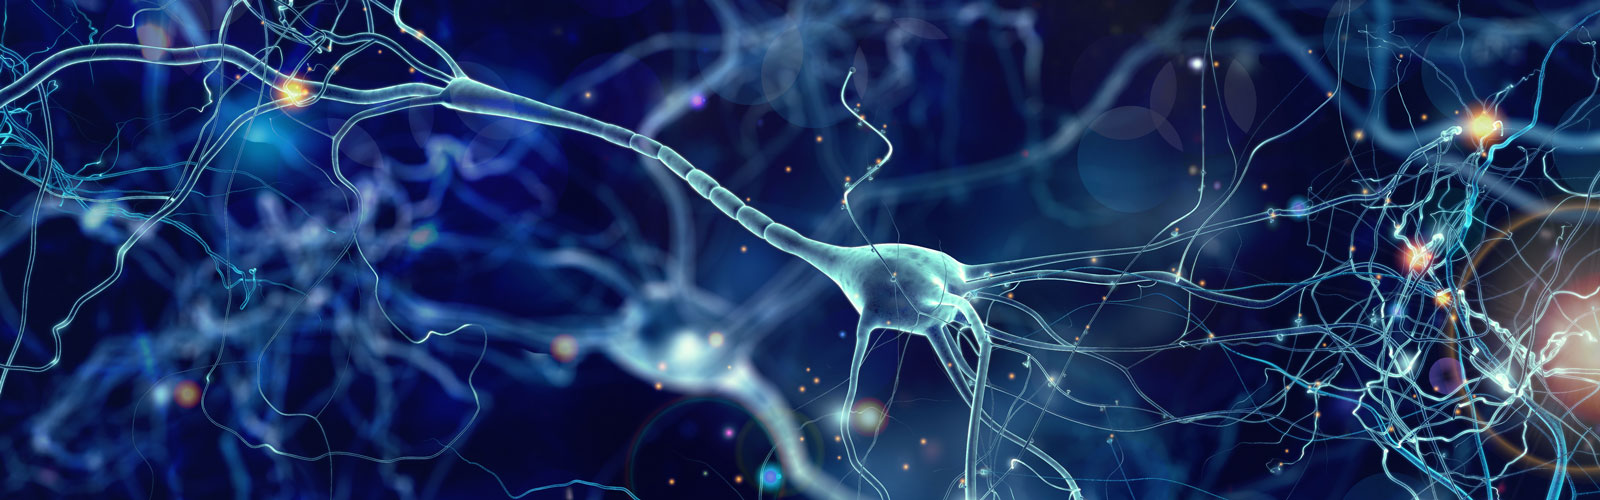 Conceptual illustration of neuron cells with glowing link knots in abstract dark space, high resolution 3D illustration.